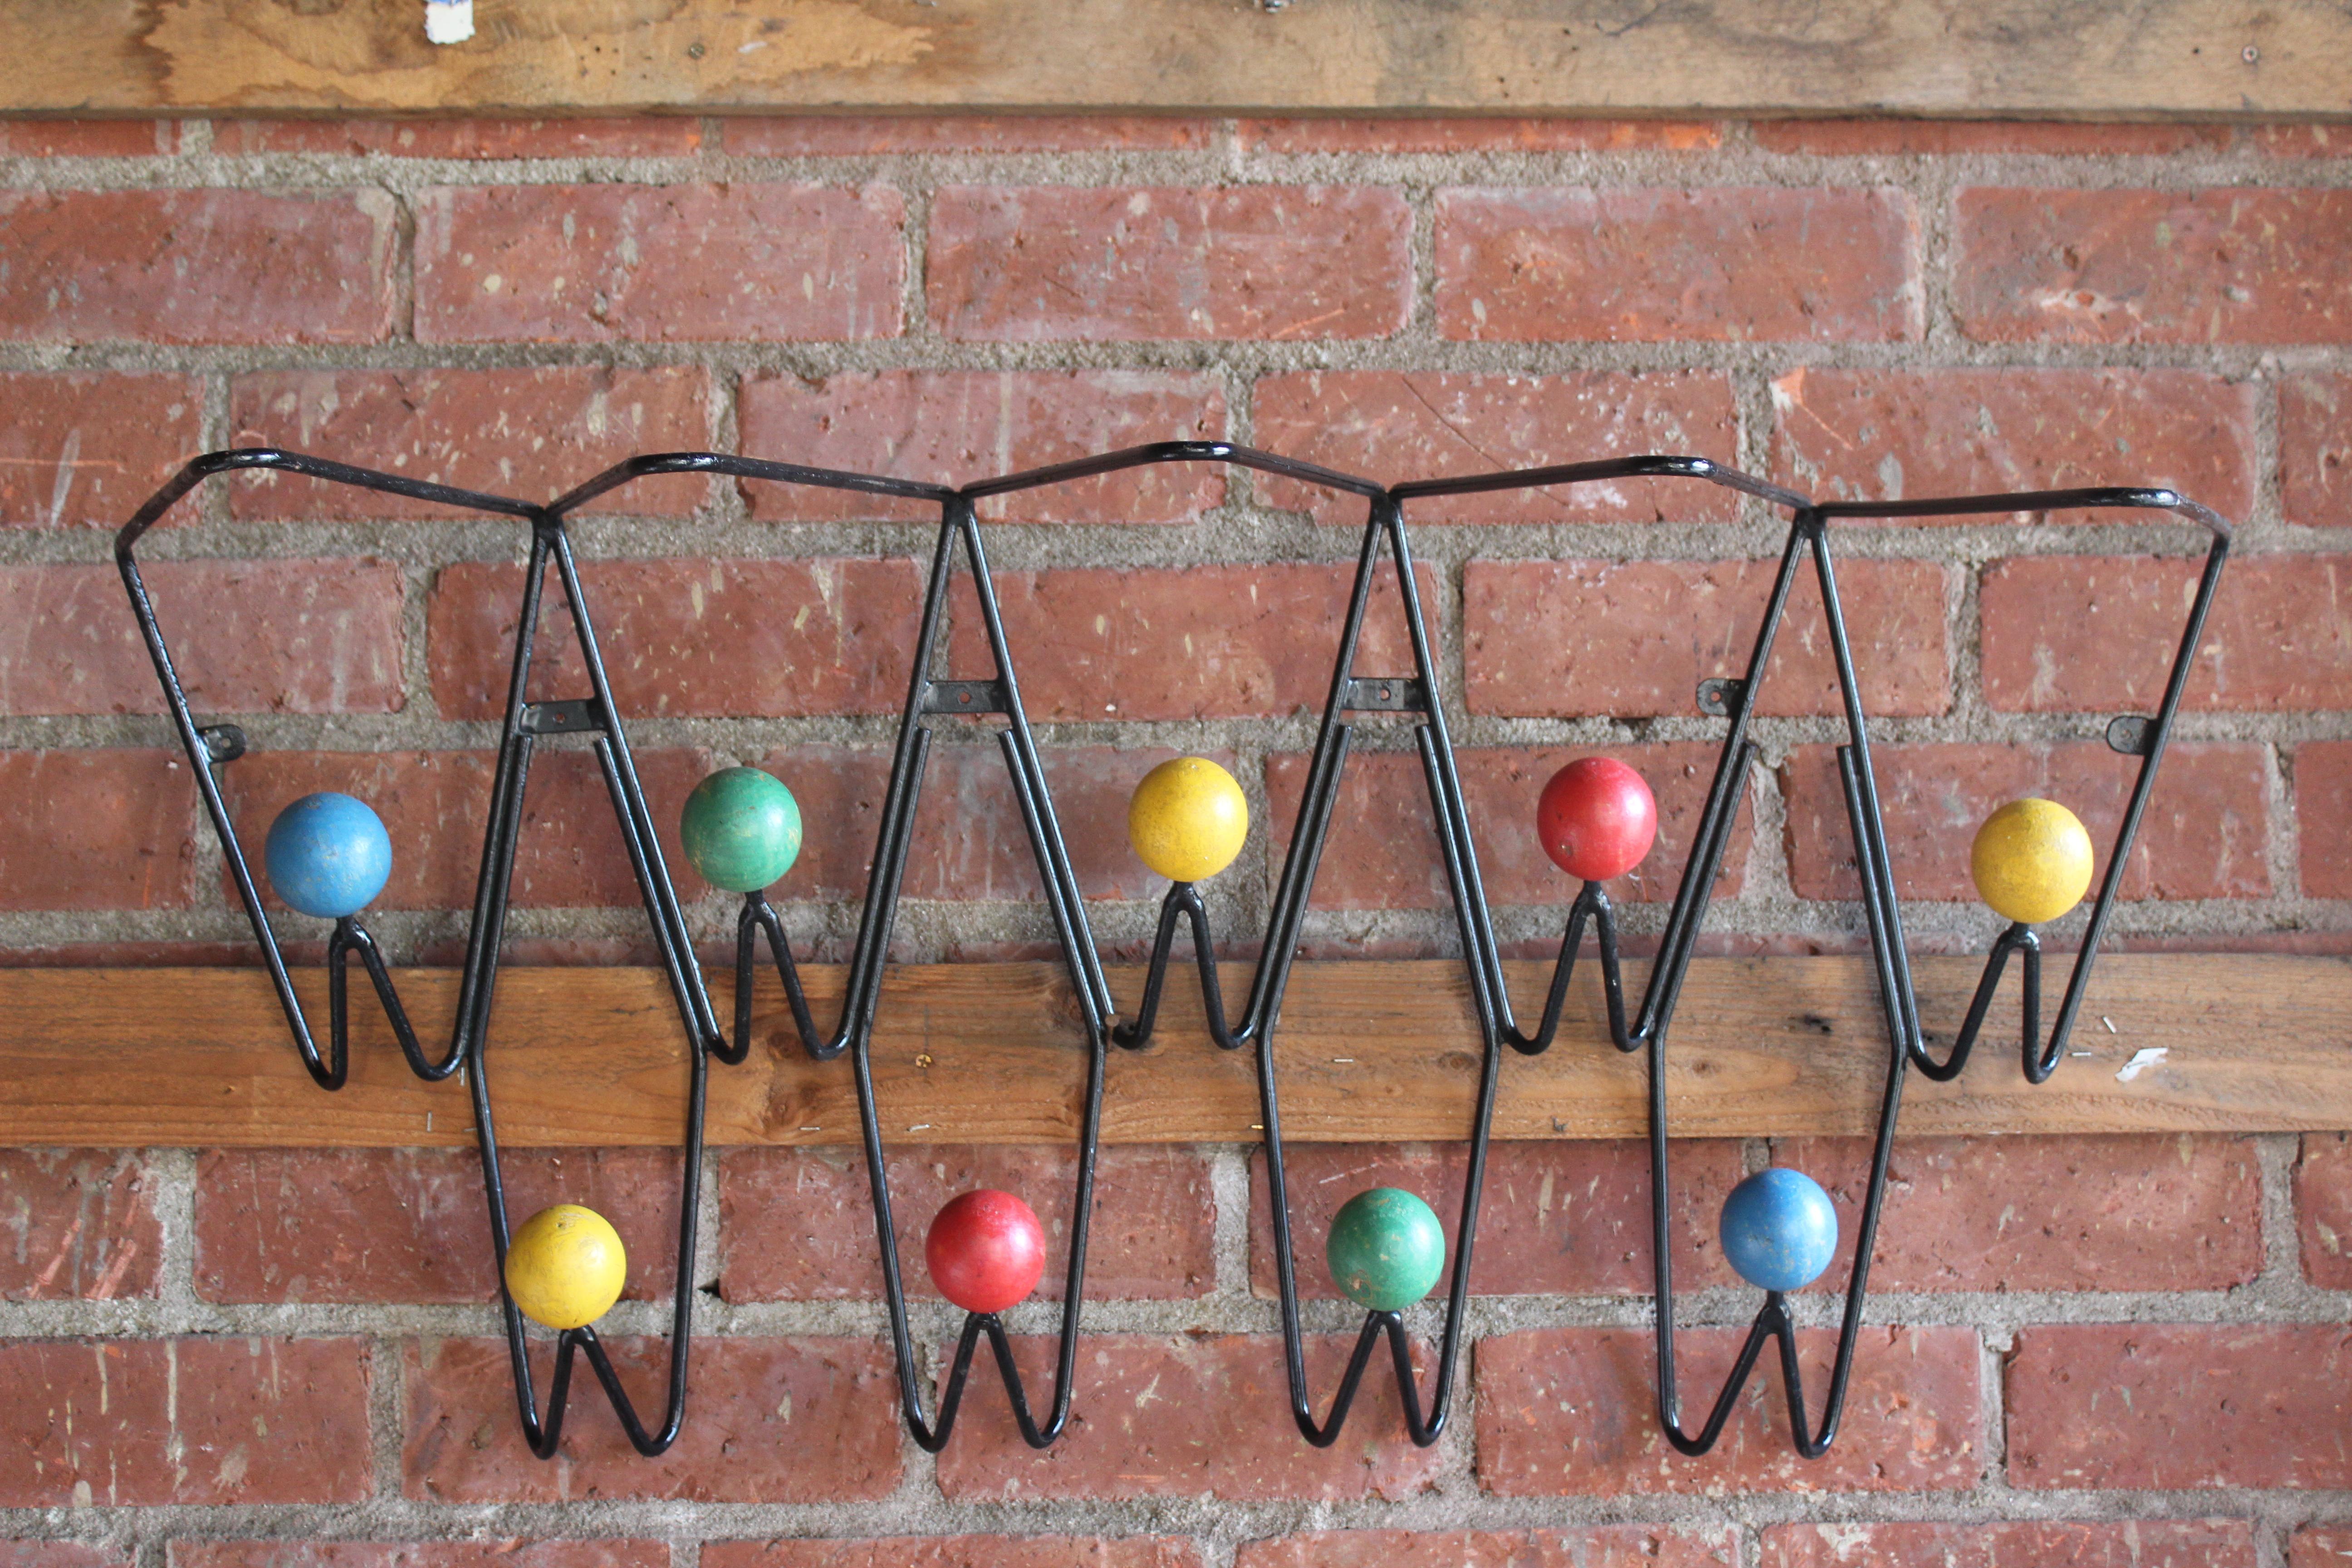 A vintage French coat rack designed by Roger Feraud, 1950s. Made of iron with painted wood balls to hang your coats and hats. The top can be used as a shelf for hats as well. In overall wonderful condition with patina to the painted balls. 41